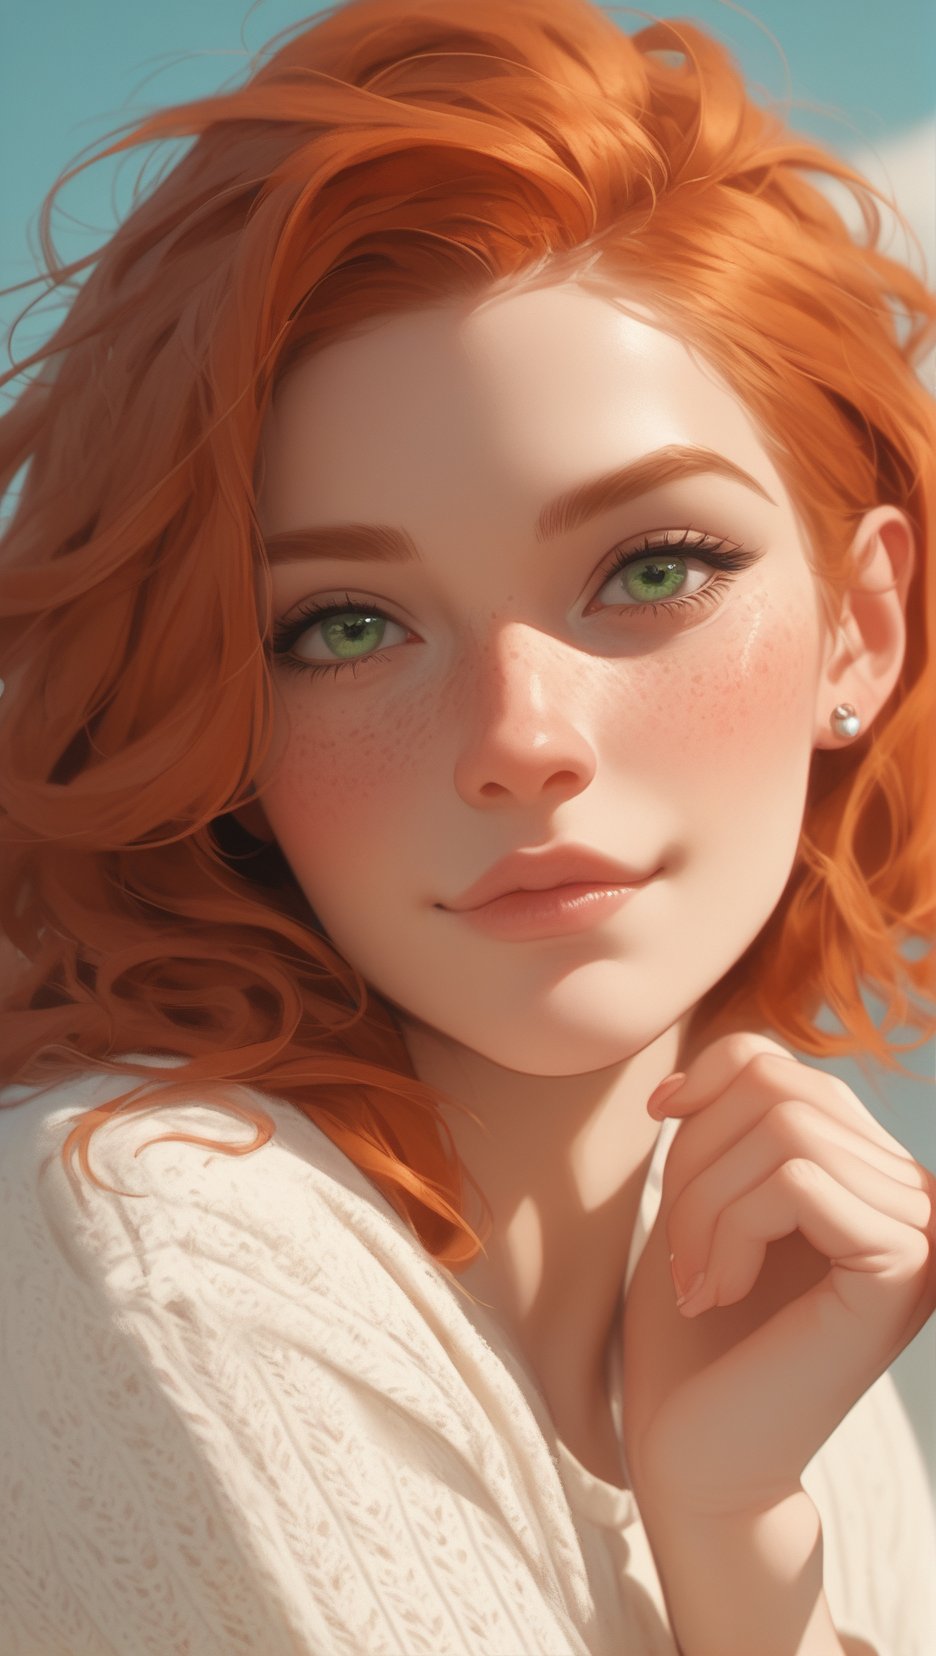 score_9, score_8_up, score_7_up, rating_questionable,Woman, freckles, extremely attractive, adorable, extremely pale skin, orange hair, green eyes, light directed at face, 8k, redhead 